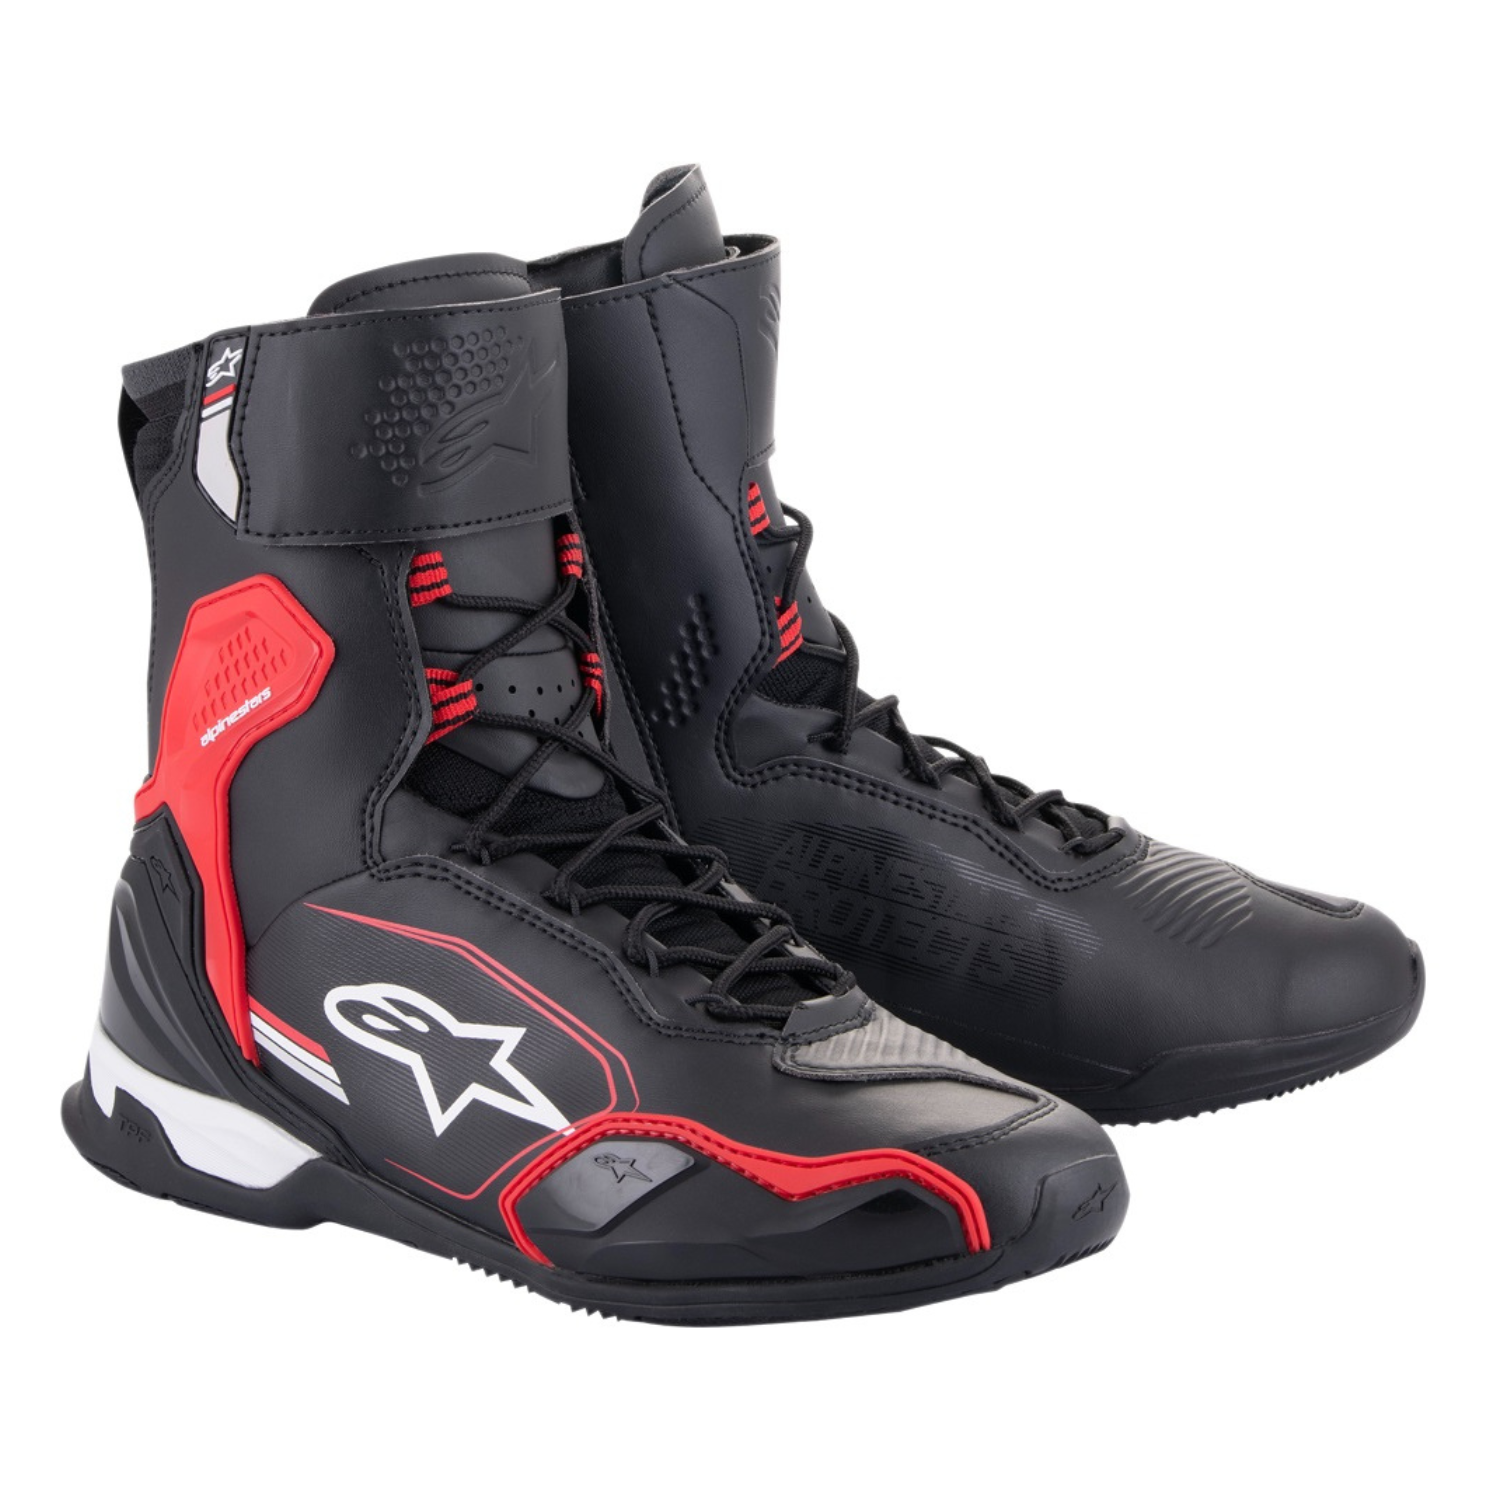 Image of Alpinestars Superfaster Shoes Black Bright Red White Size US 10 EN